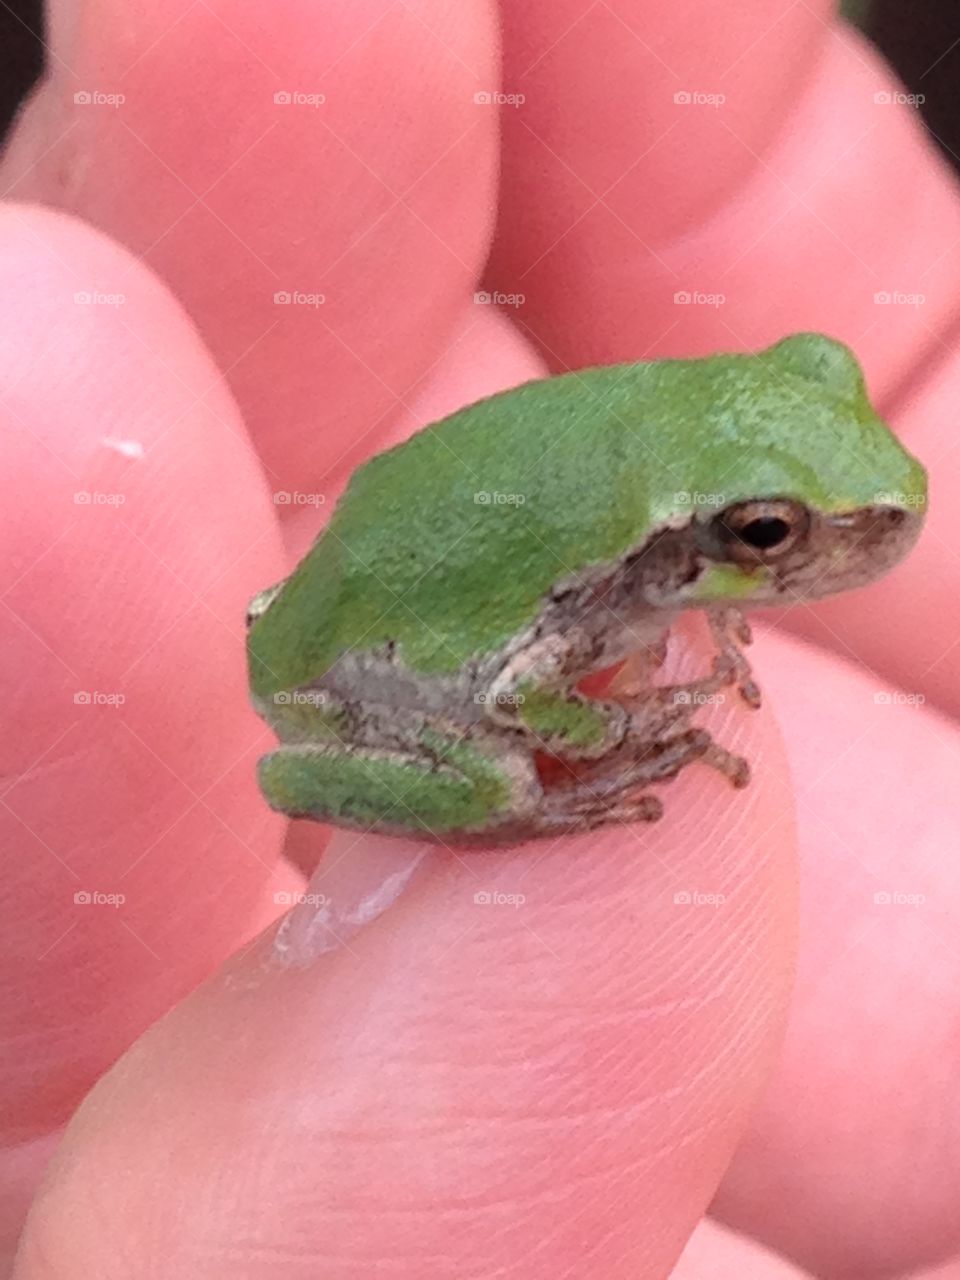 Tree frog. Little green tree frog getting warm on my hand!